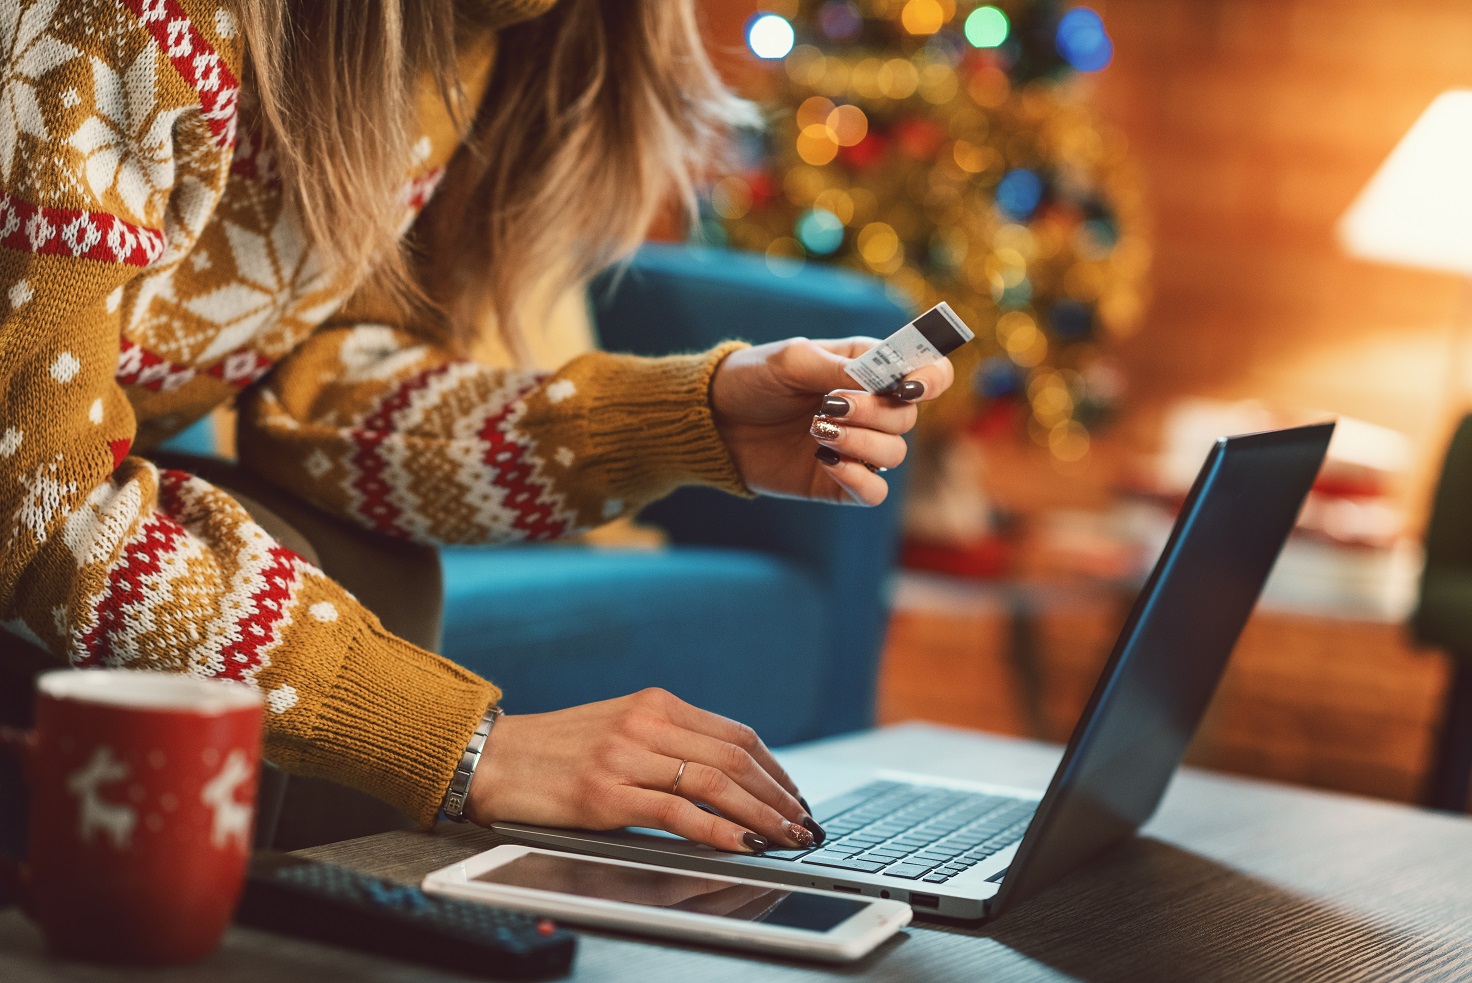 CyberSecurity Tips for Holiday Shopping, Giving and Traveling